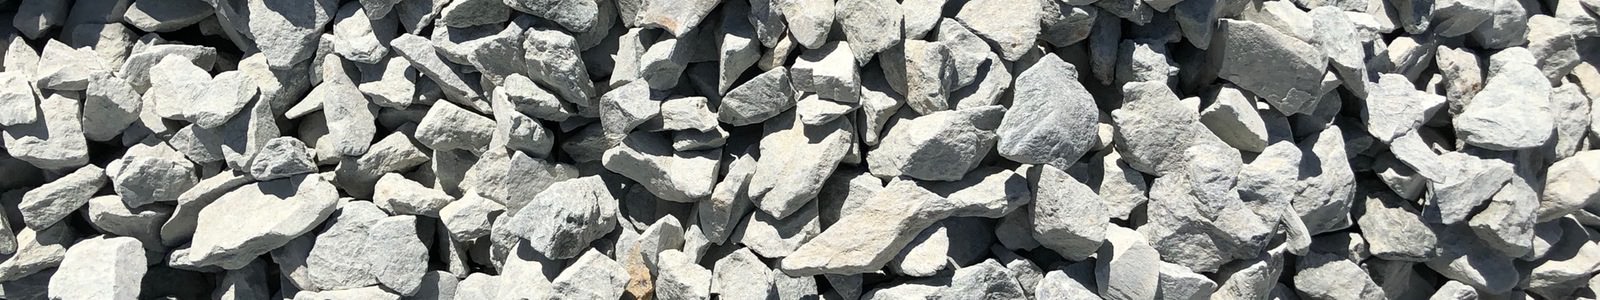 crushed rock at a landscape material supply yard in stockton, ca